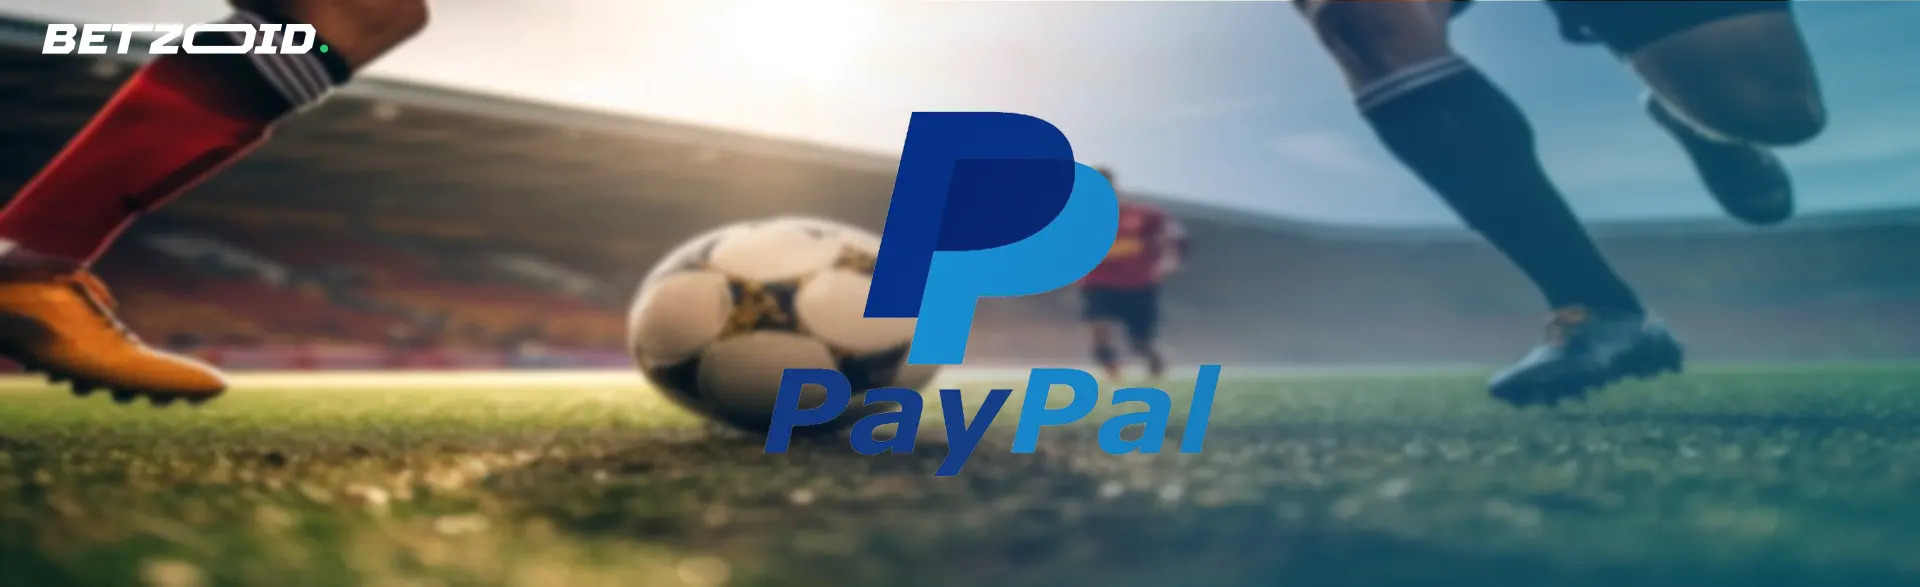 Sports betting sites that accept Paypal.